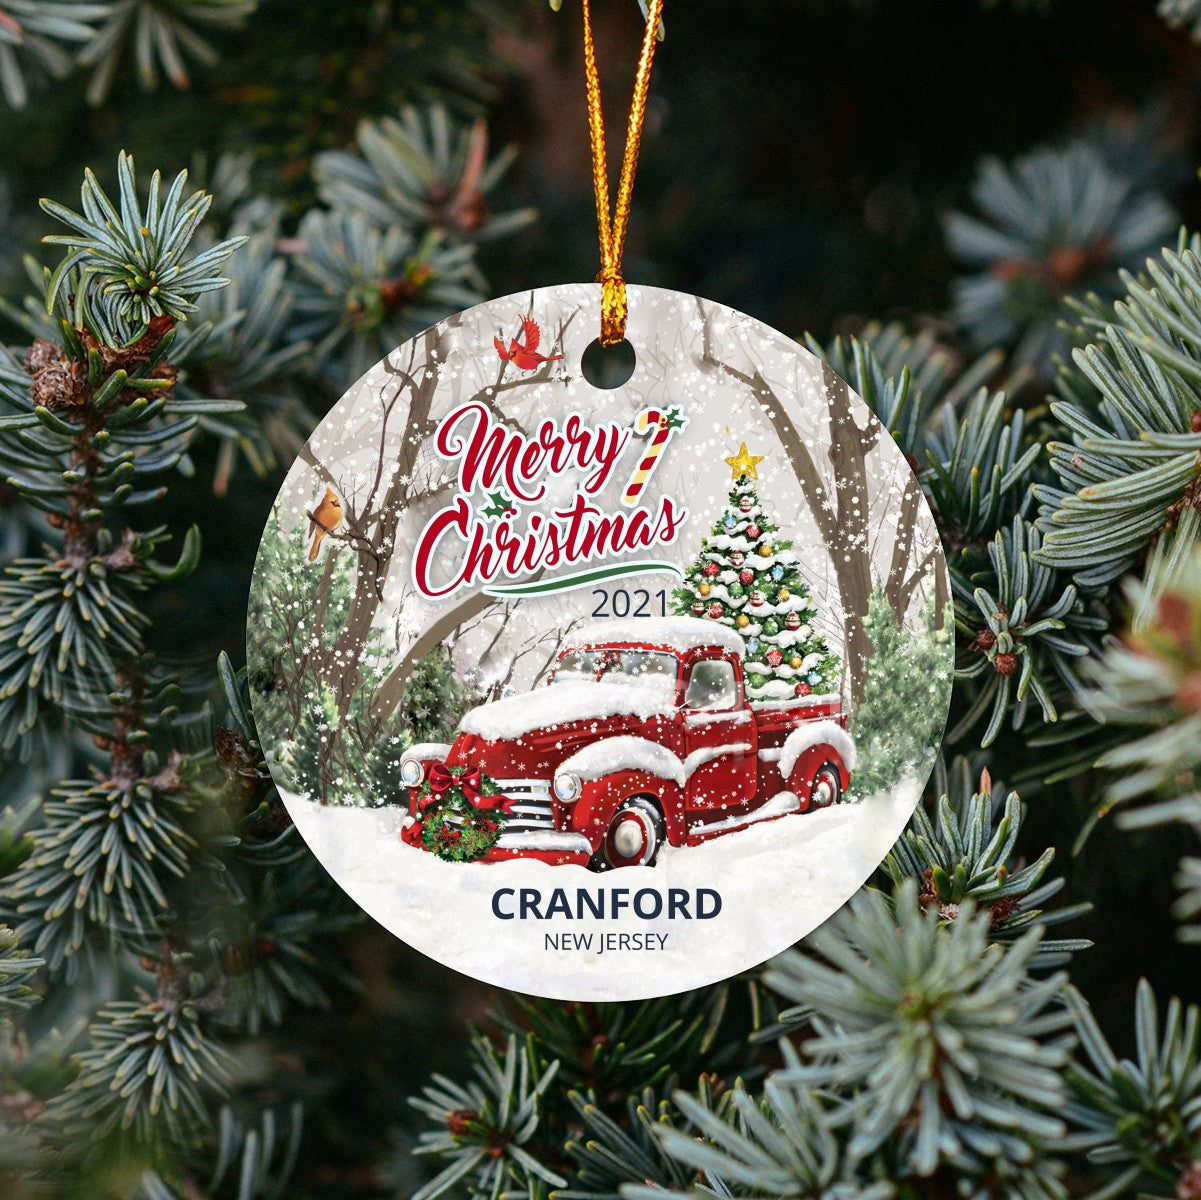 Christmas Tree Ornaments Cranford - Ornament Customize With Name City And State Cranford New Jersey NJ - Red Truck Xmas Ornaments 3'' Plastic Gift For Family, Friend And Housewarming